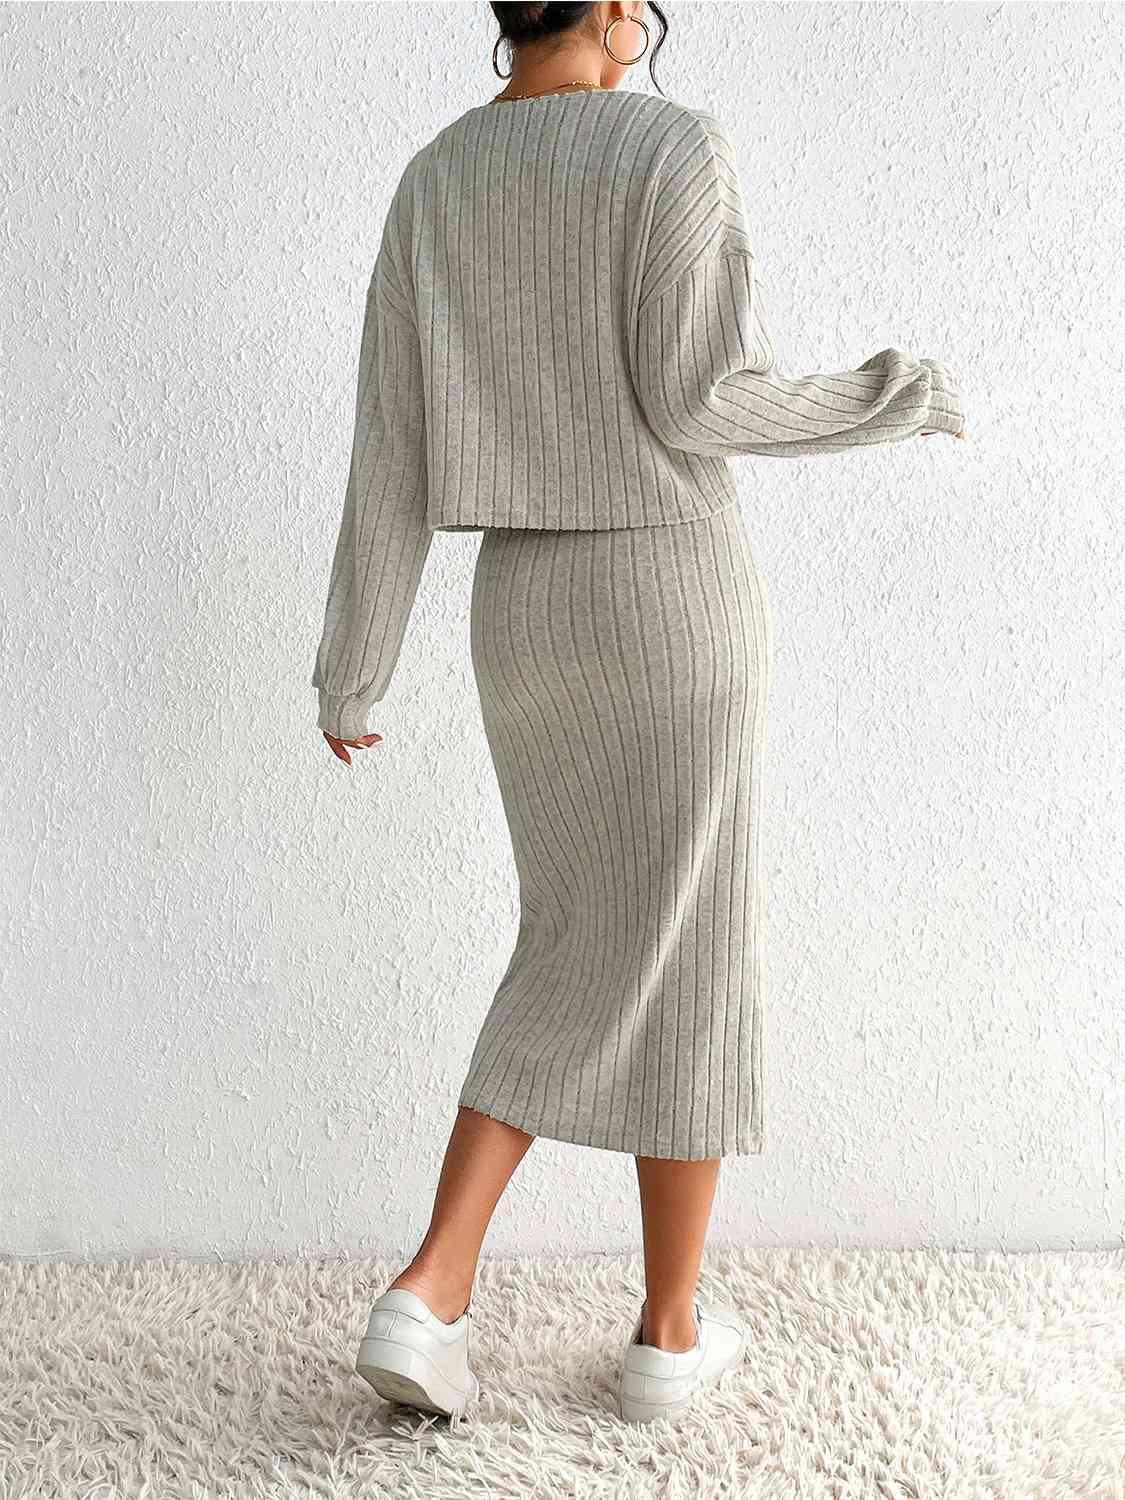 a woman in a grey sweater and skirt